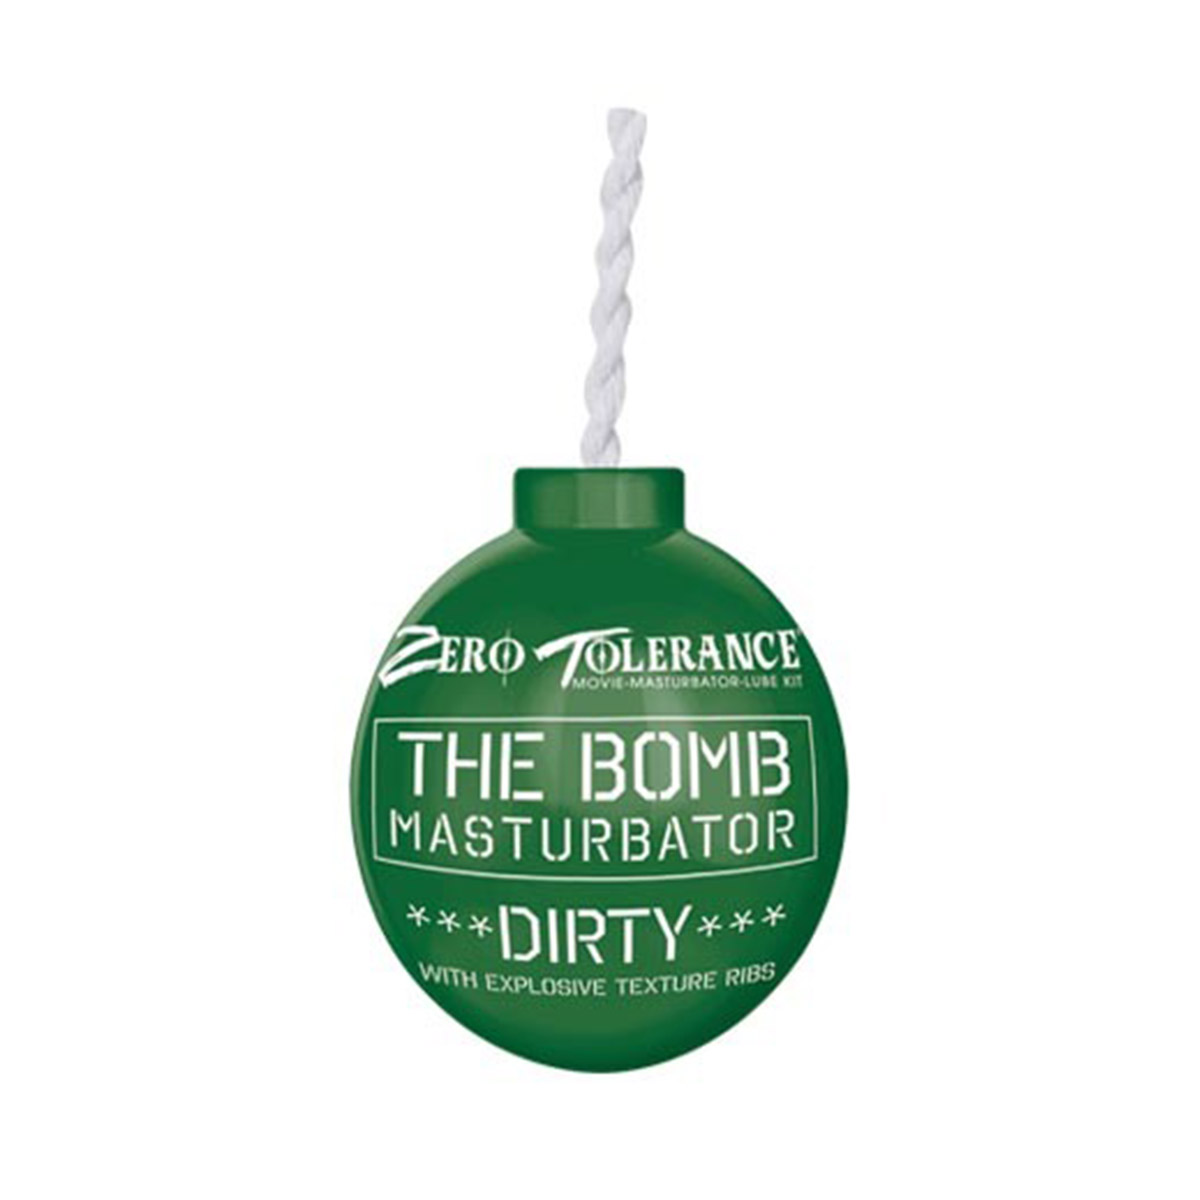 The-bomb-dirty-front.jpg